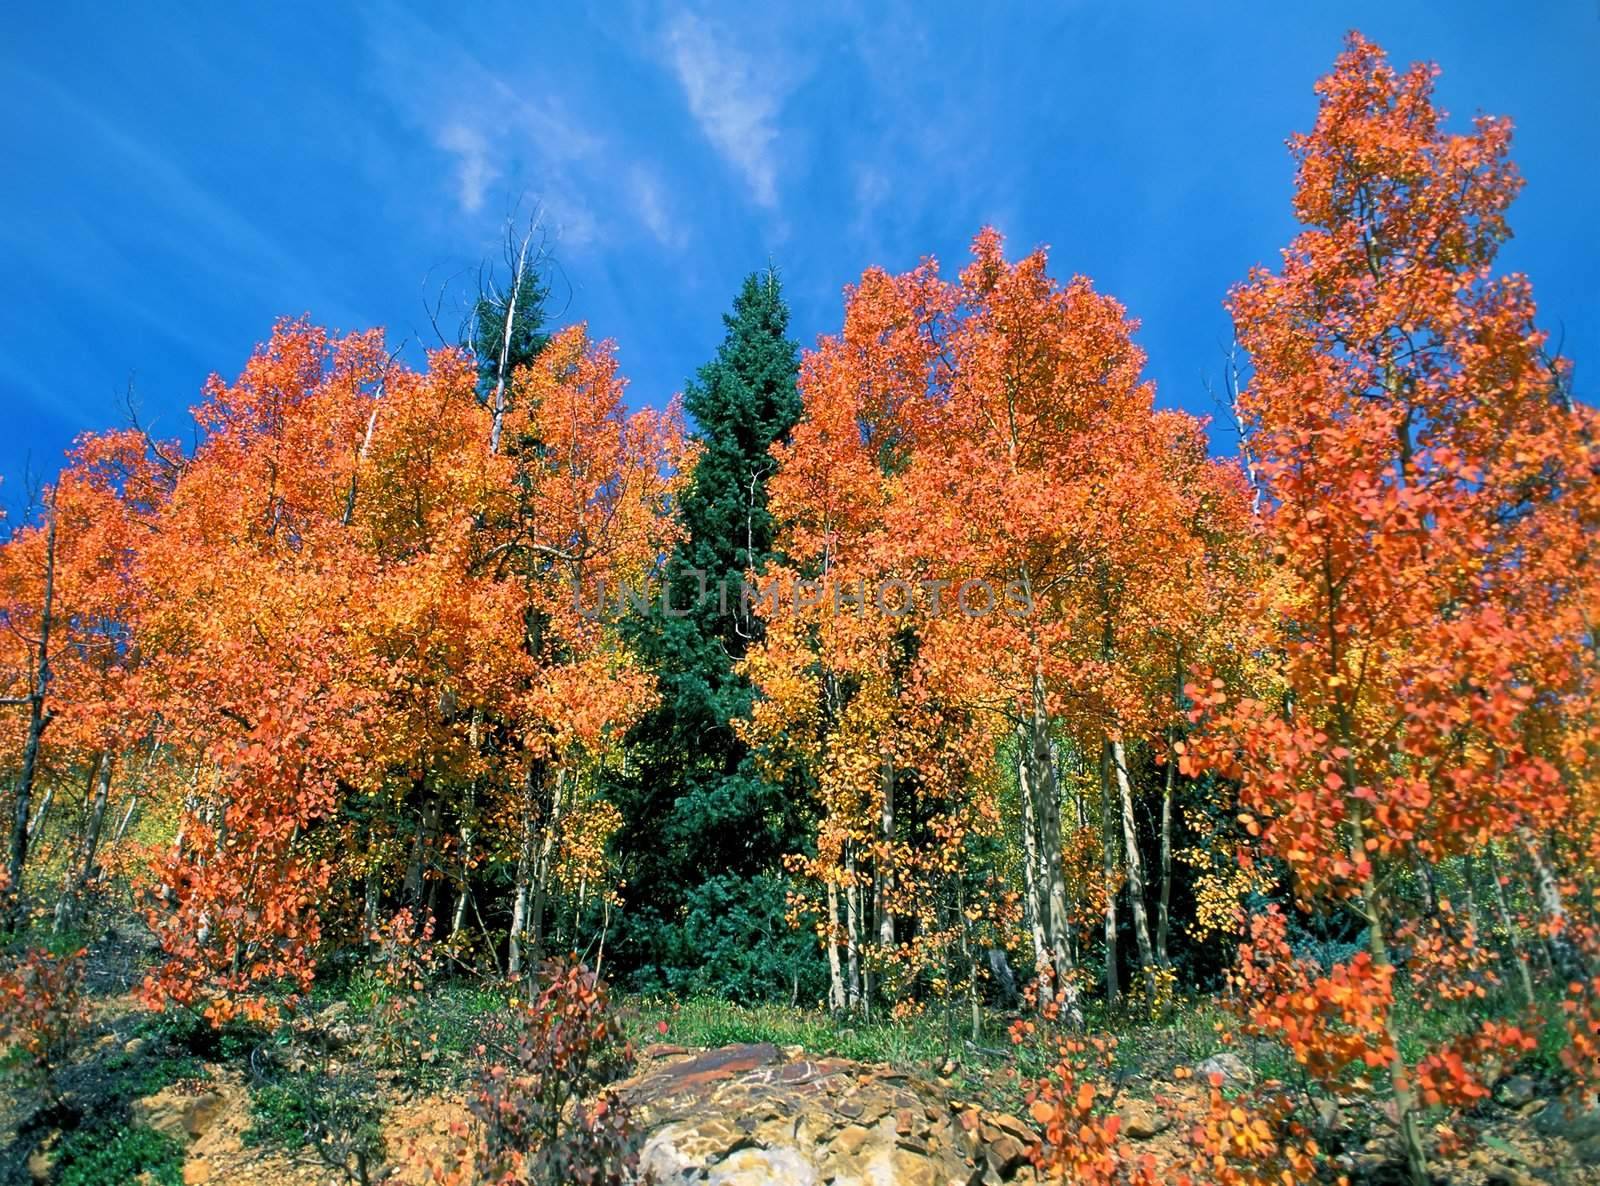 Red Aspens at Silverton, CO by Geoarts